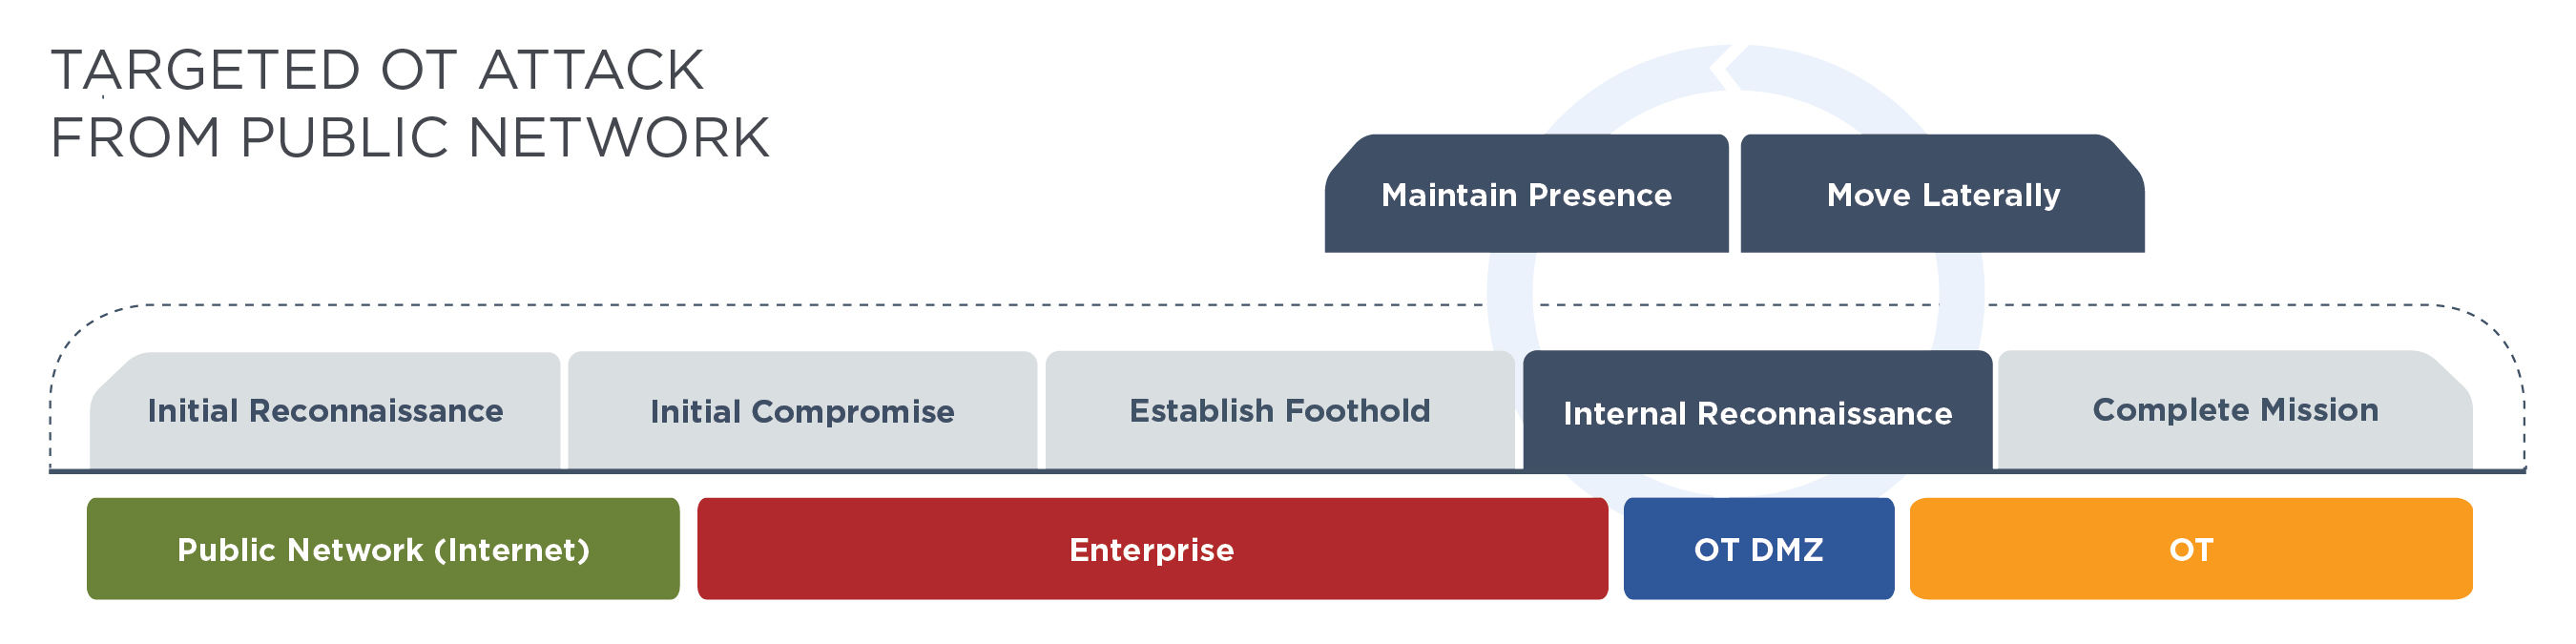 Tactics, Techniques and Procedures (TTPs) Utilized by FireEye's Red Team  Tools